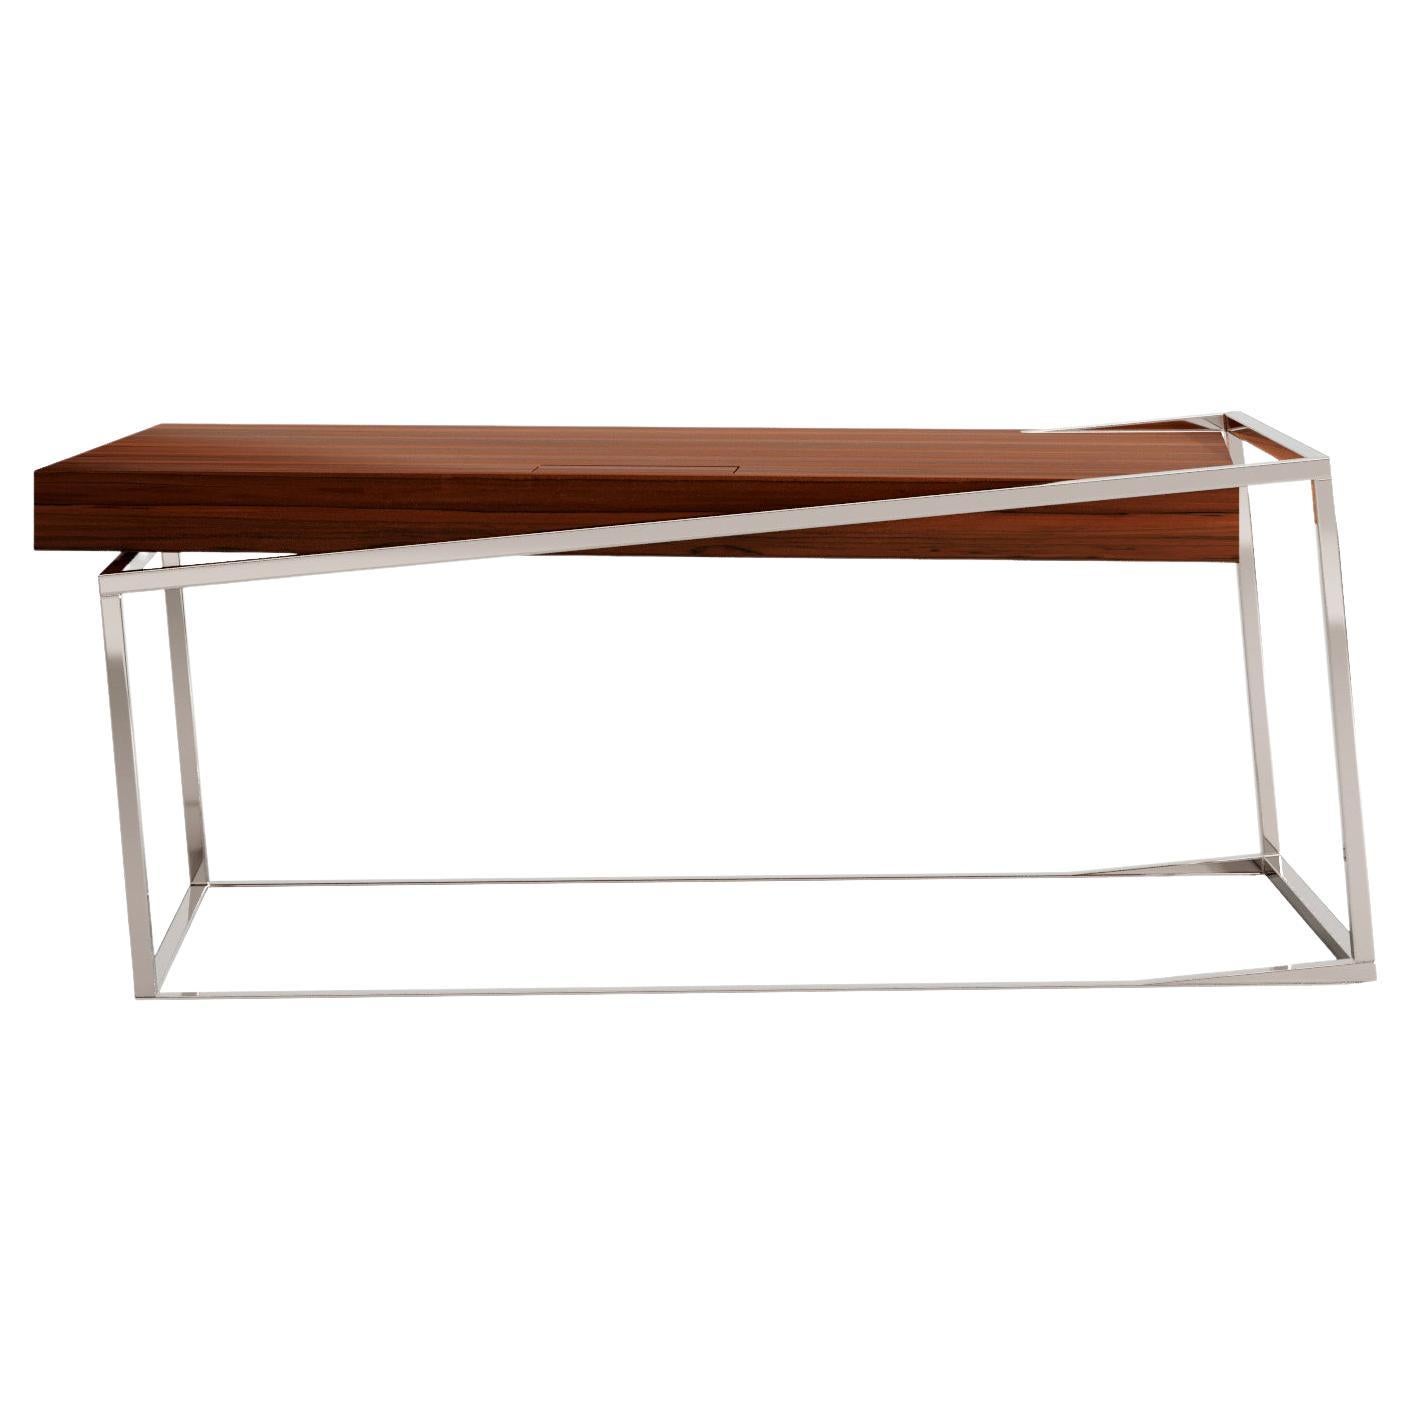 21st Century Modern Writing Executive Desk in Wood and Brushed Stainless Steel